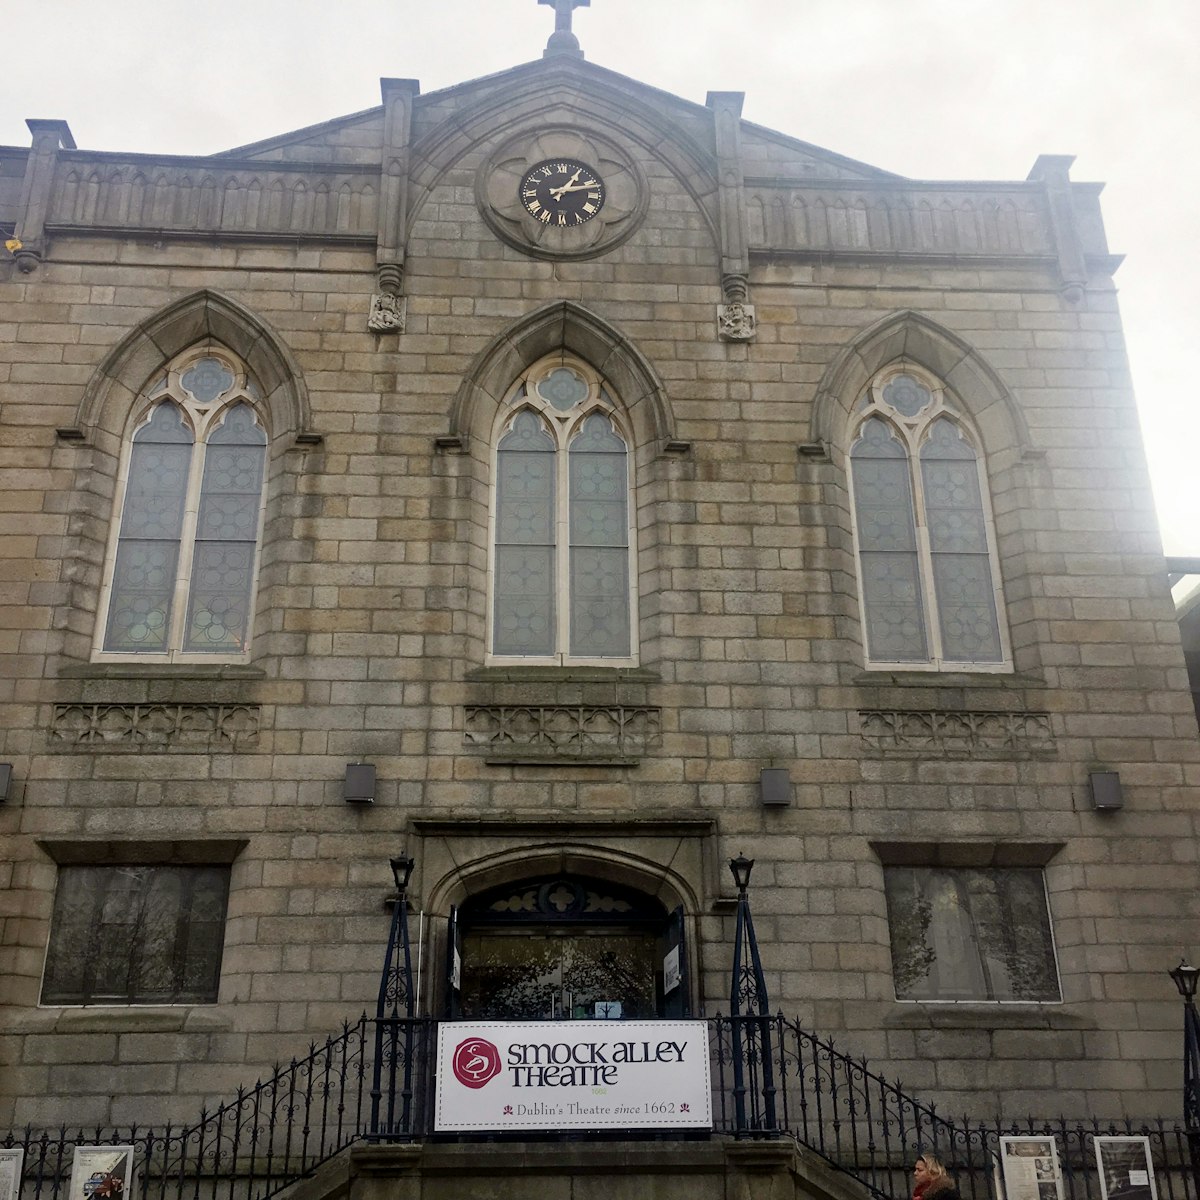 The facade of the Smock Alley Theatre.